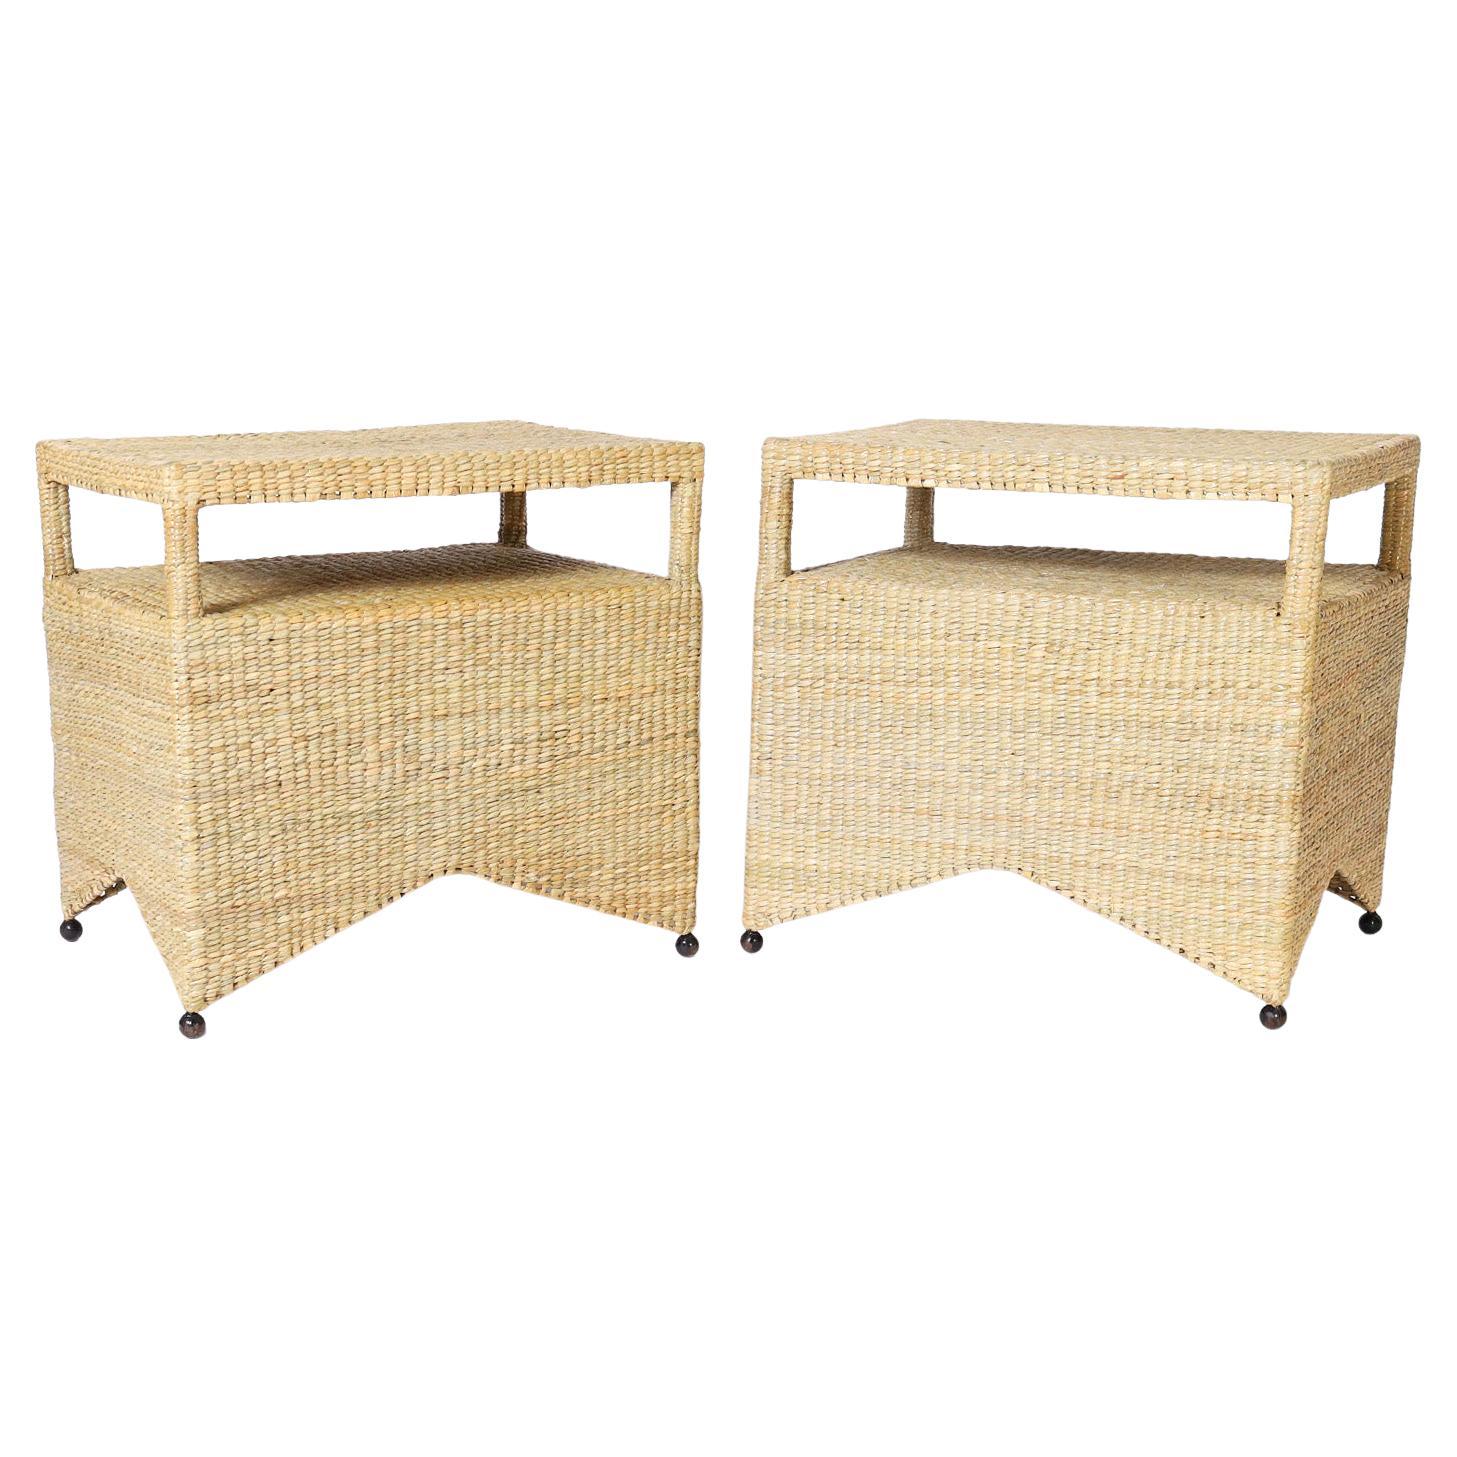 Pair of Two Tiered Wicker Stands from the FS Flores Collection For Sale